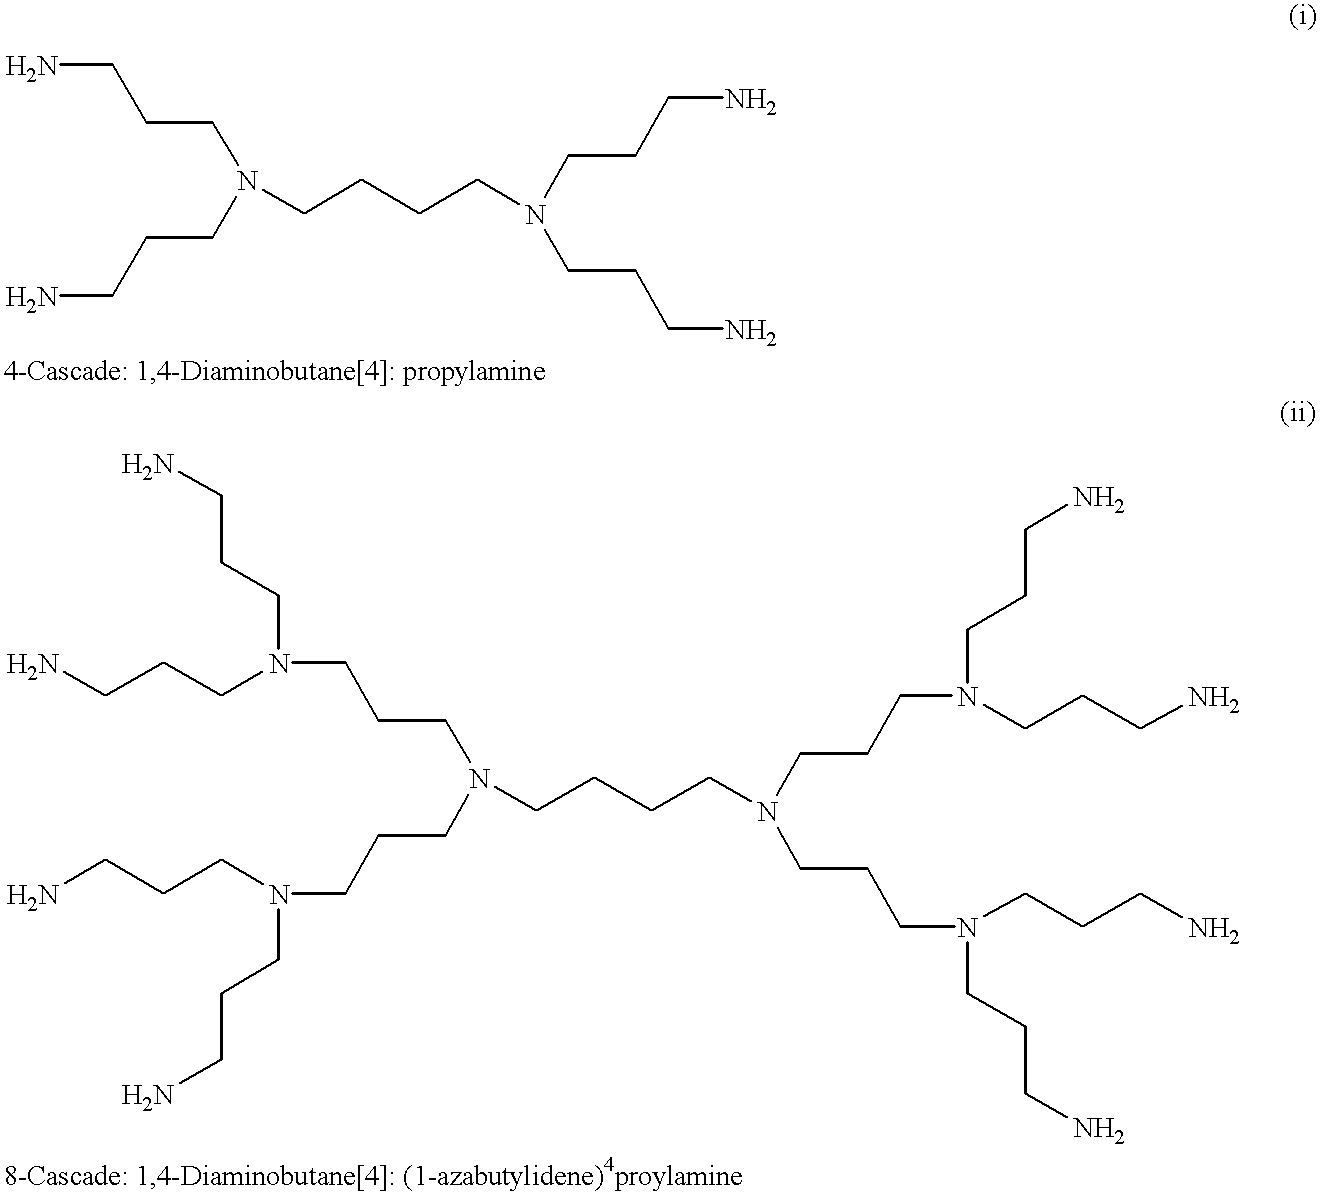 Vinyl-group-containing dendrimer and curable composition